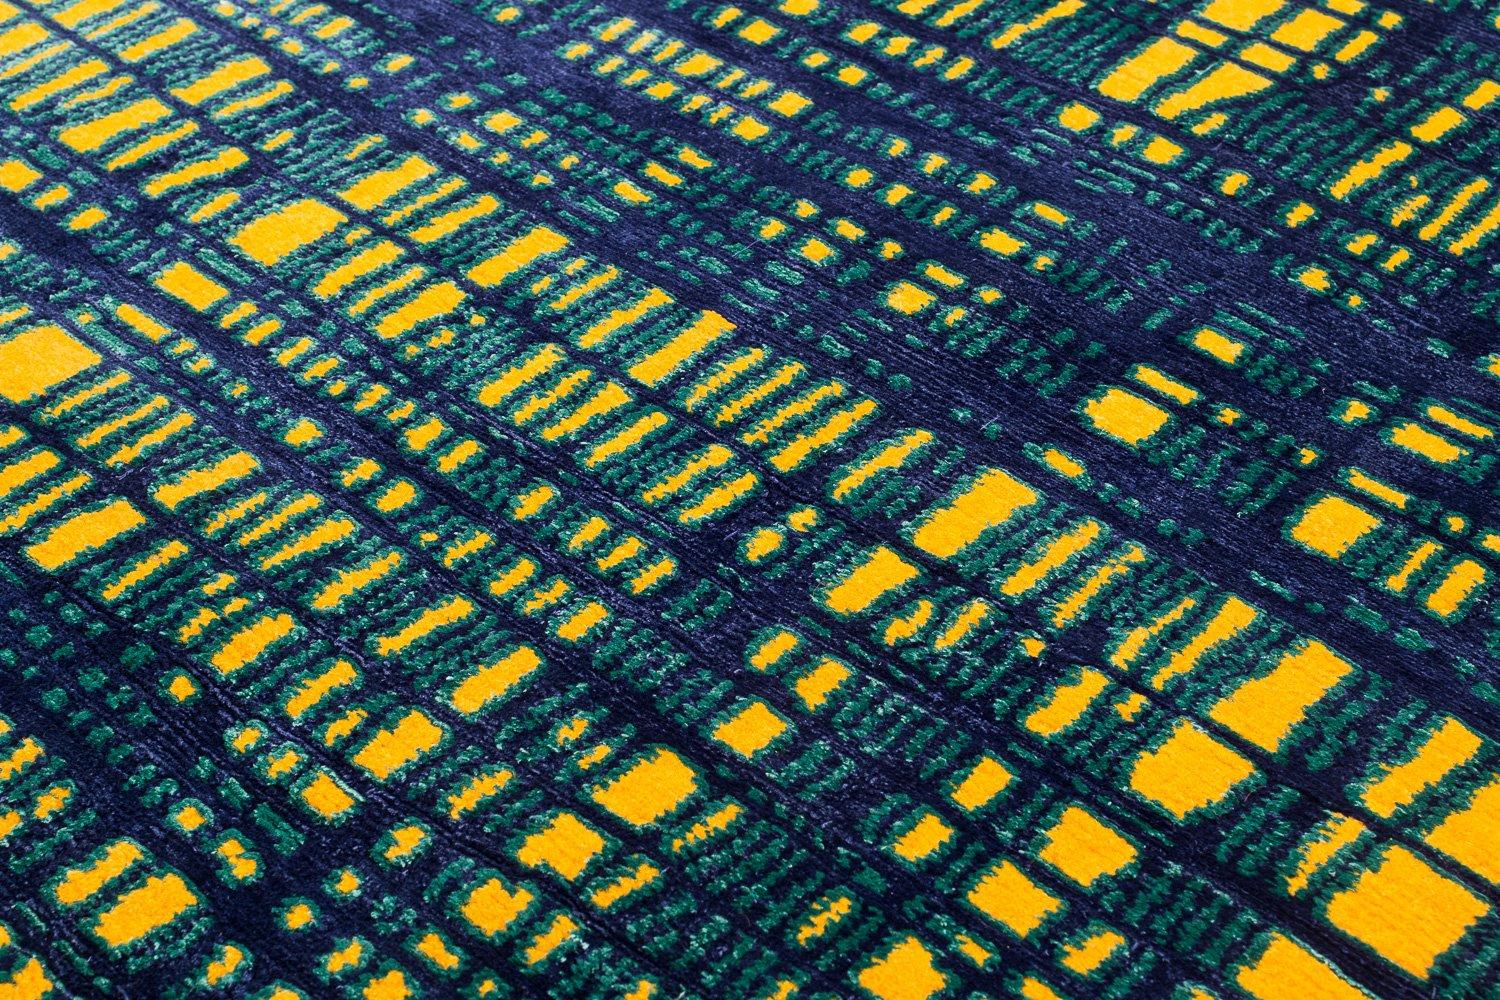 Hand-Woven Vibrant Blue and Yellow Graphic Geometric Rug Woven in Wool and Silk For Sale